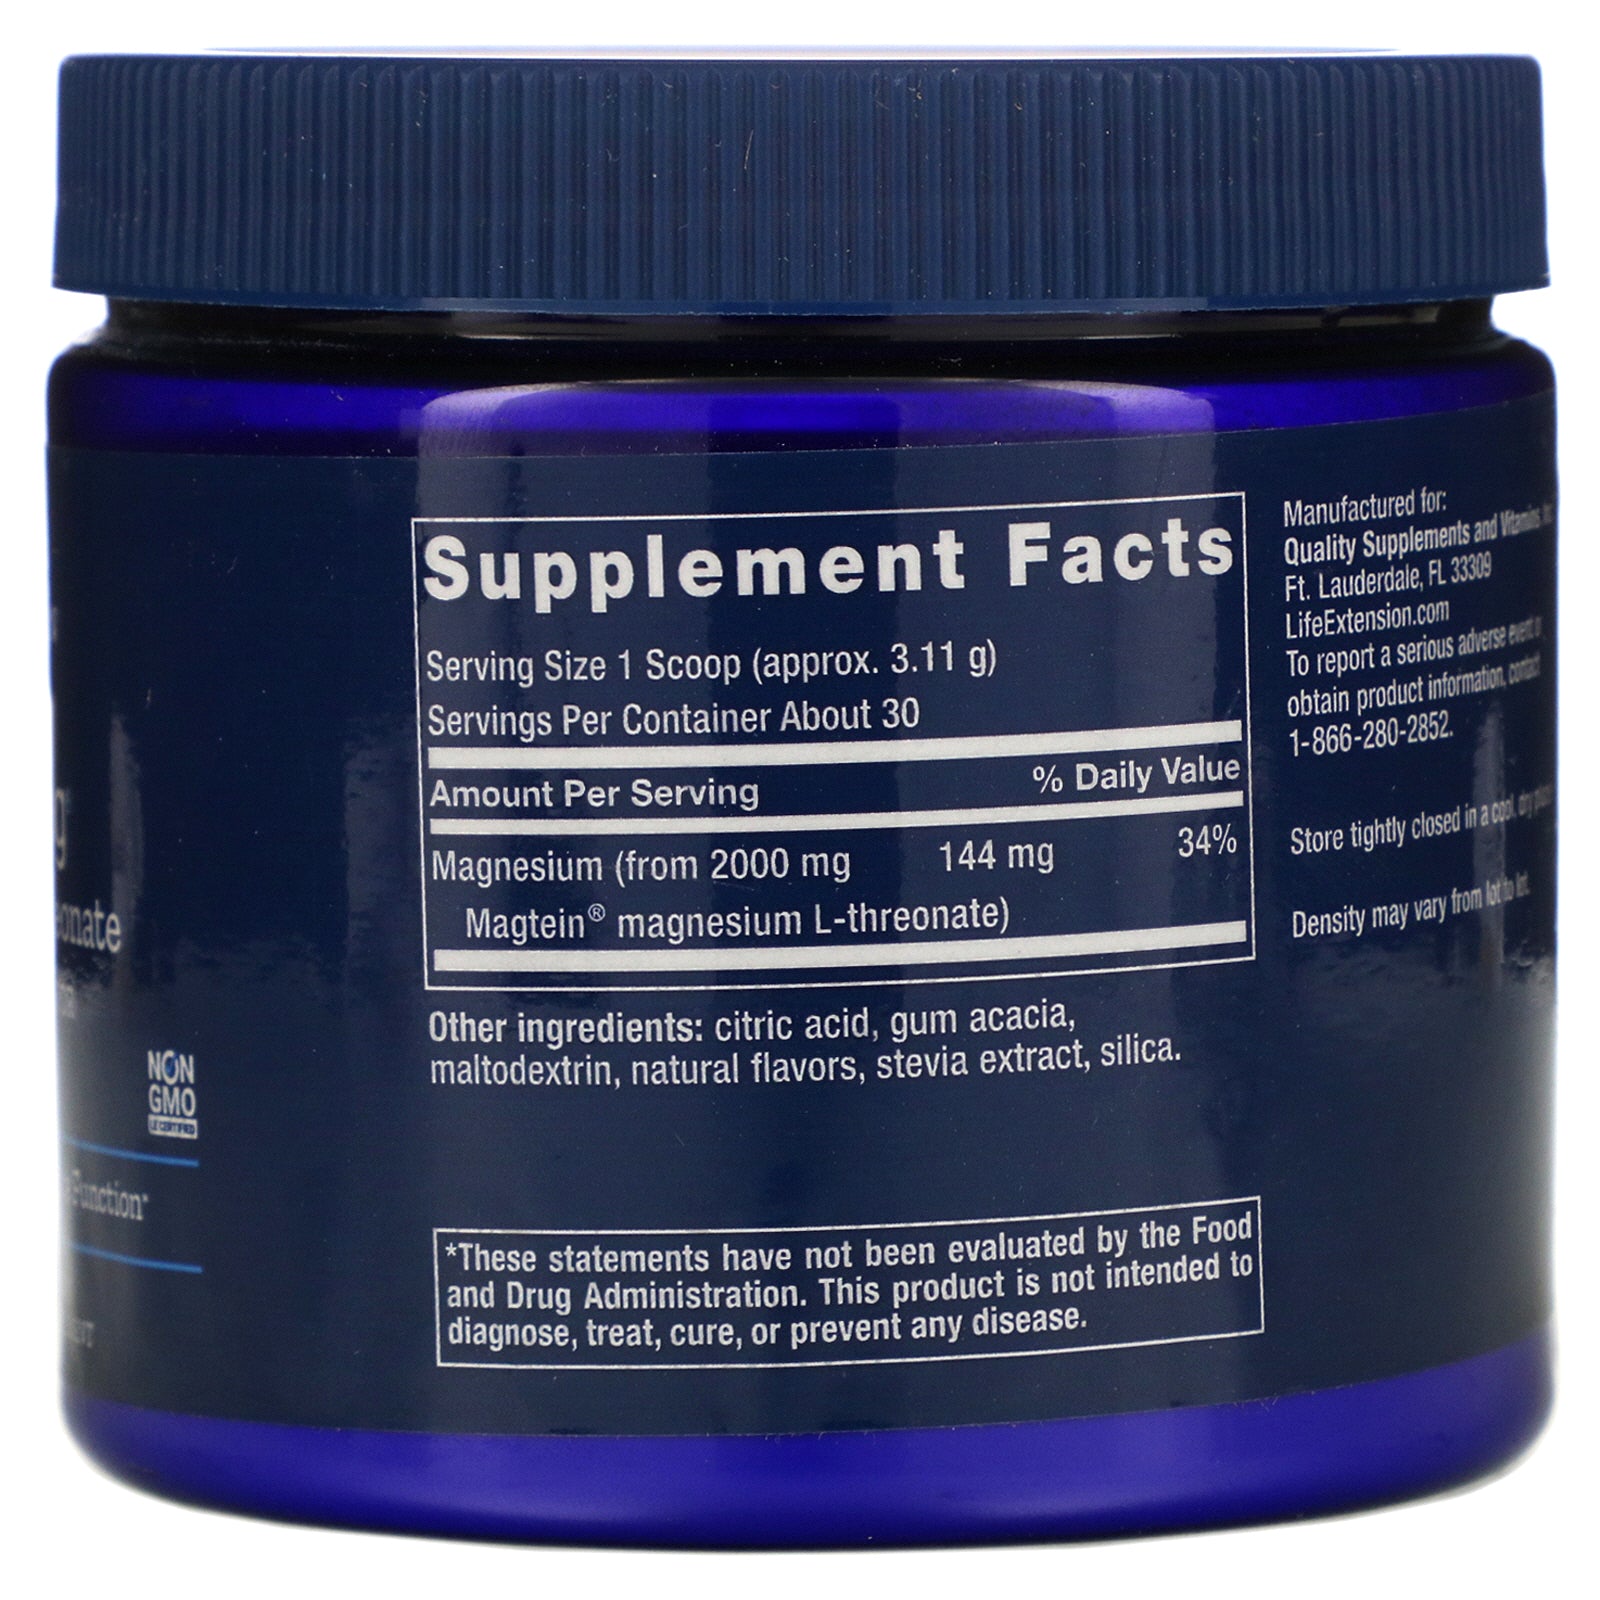 Life Extension, Neuro-Mag, Magnesium L-Threonate, Tropical Punch Flavor, 3.293 oz (93.35 g)